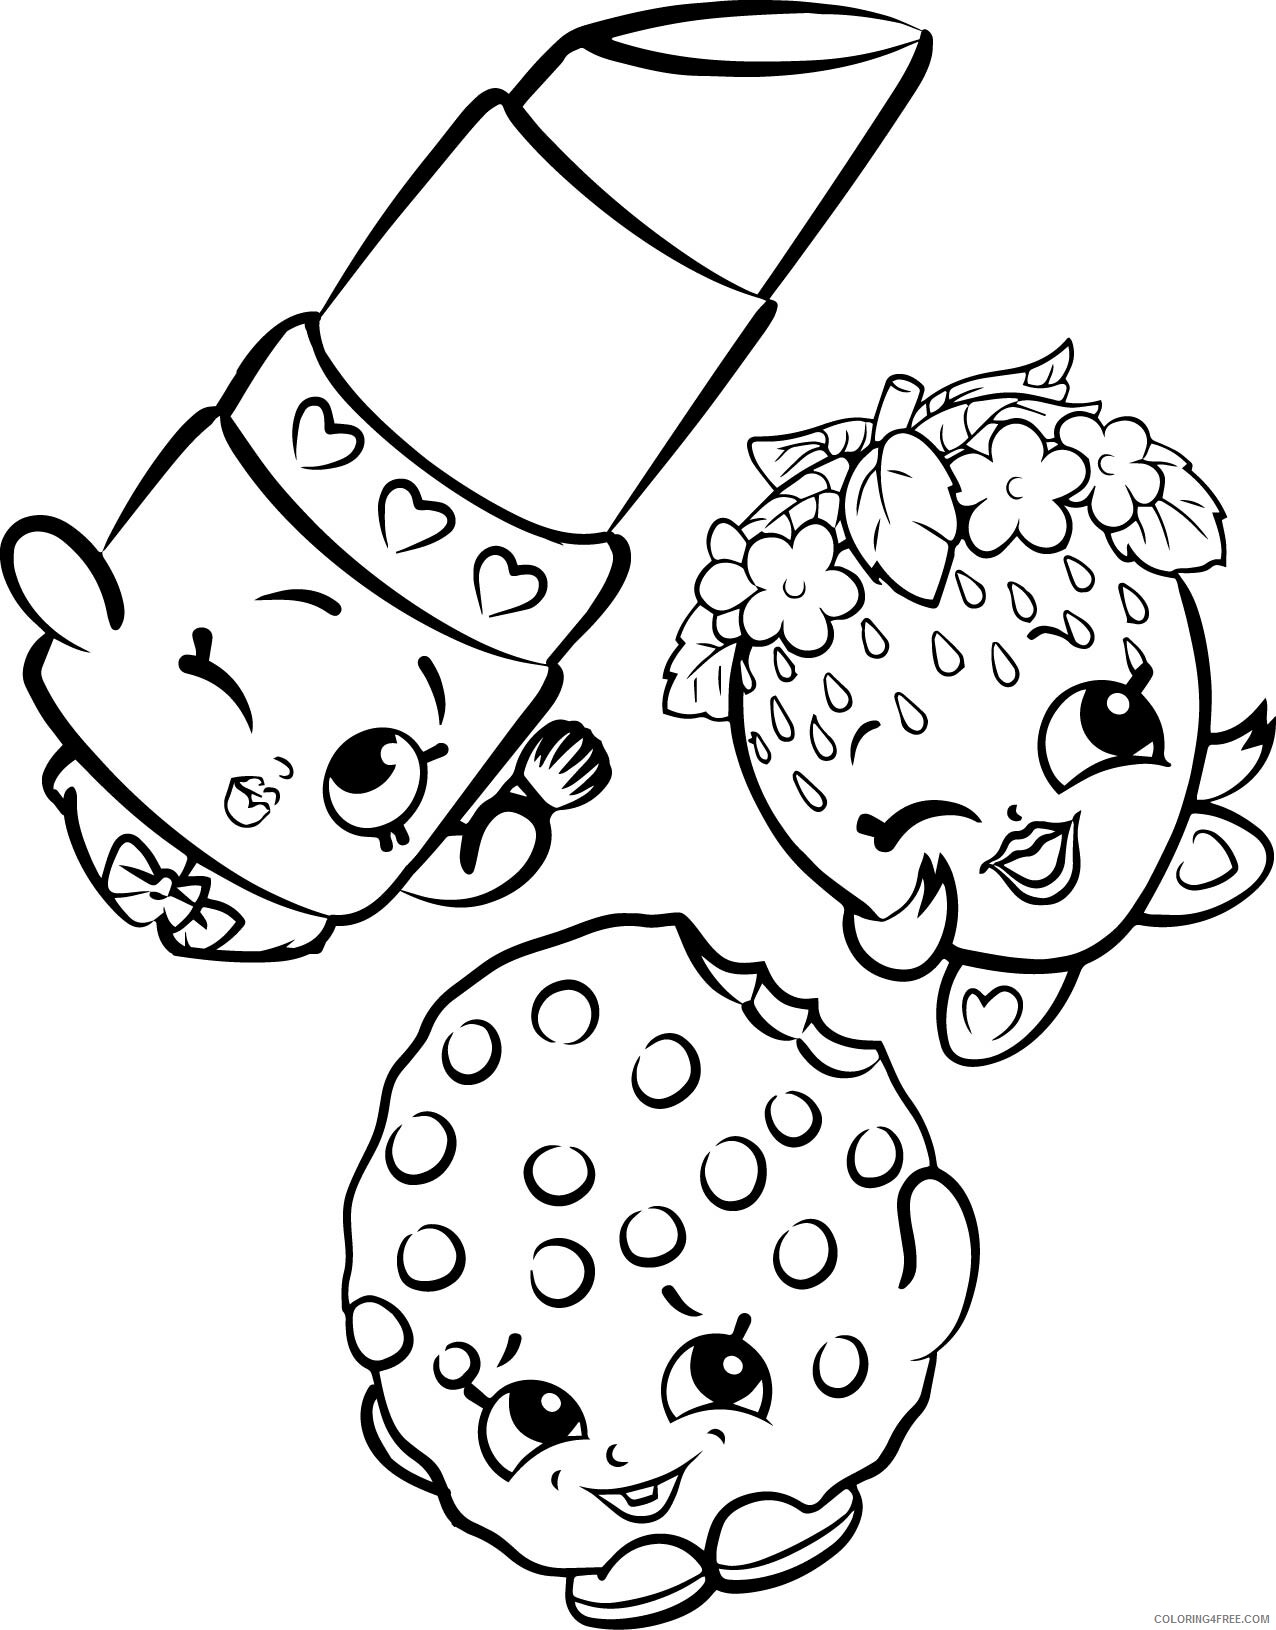 Shopkins Coloring Pages for Girls Free Shopkins Images Printable 2021 1239 Coloring4free